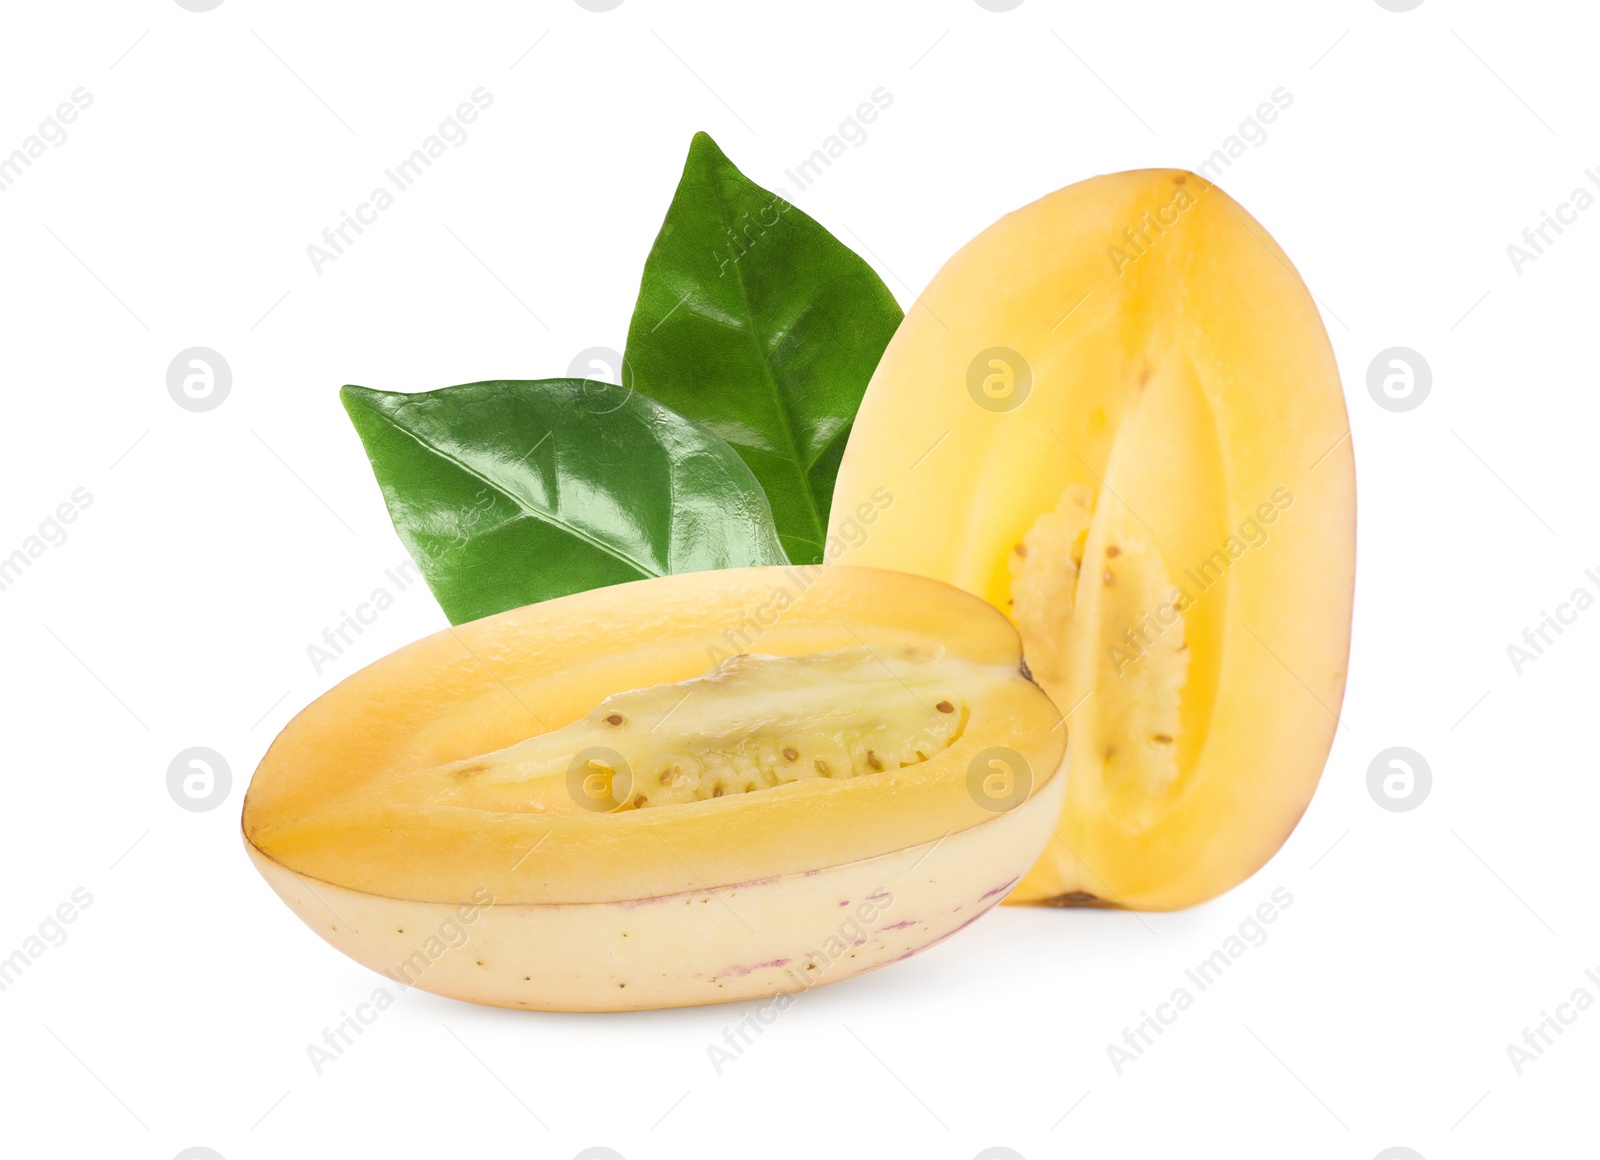 Image of Halves of fresh ripe pepino melon and green leaves on white background